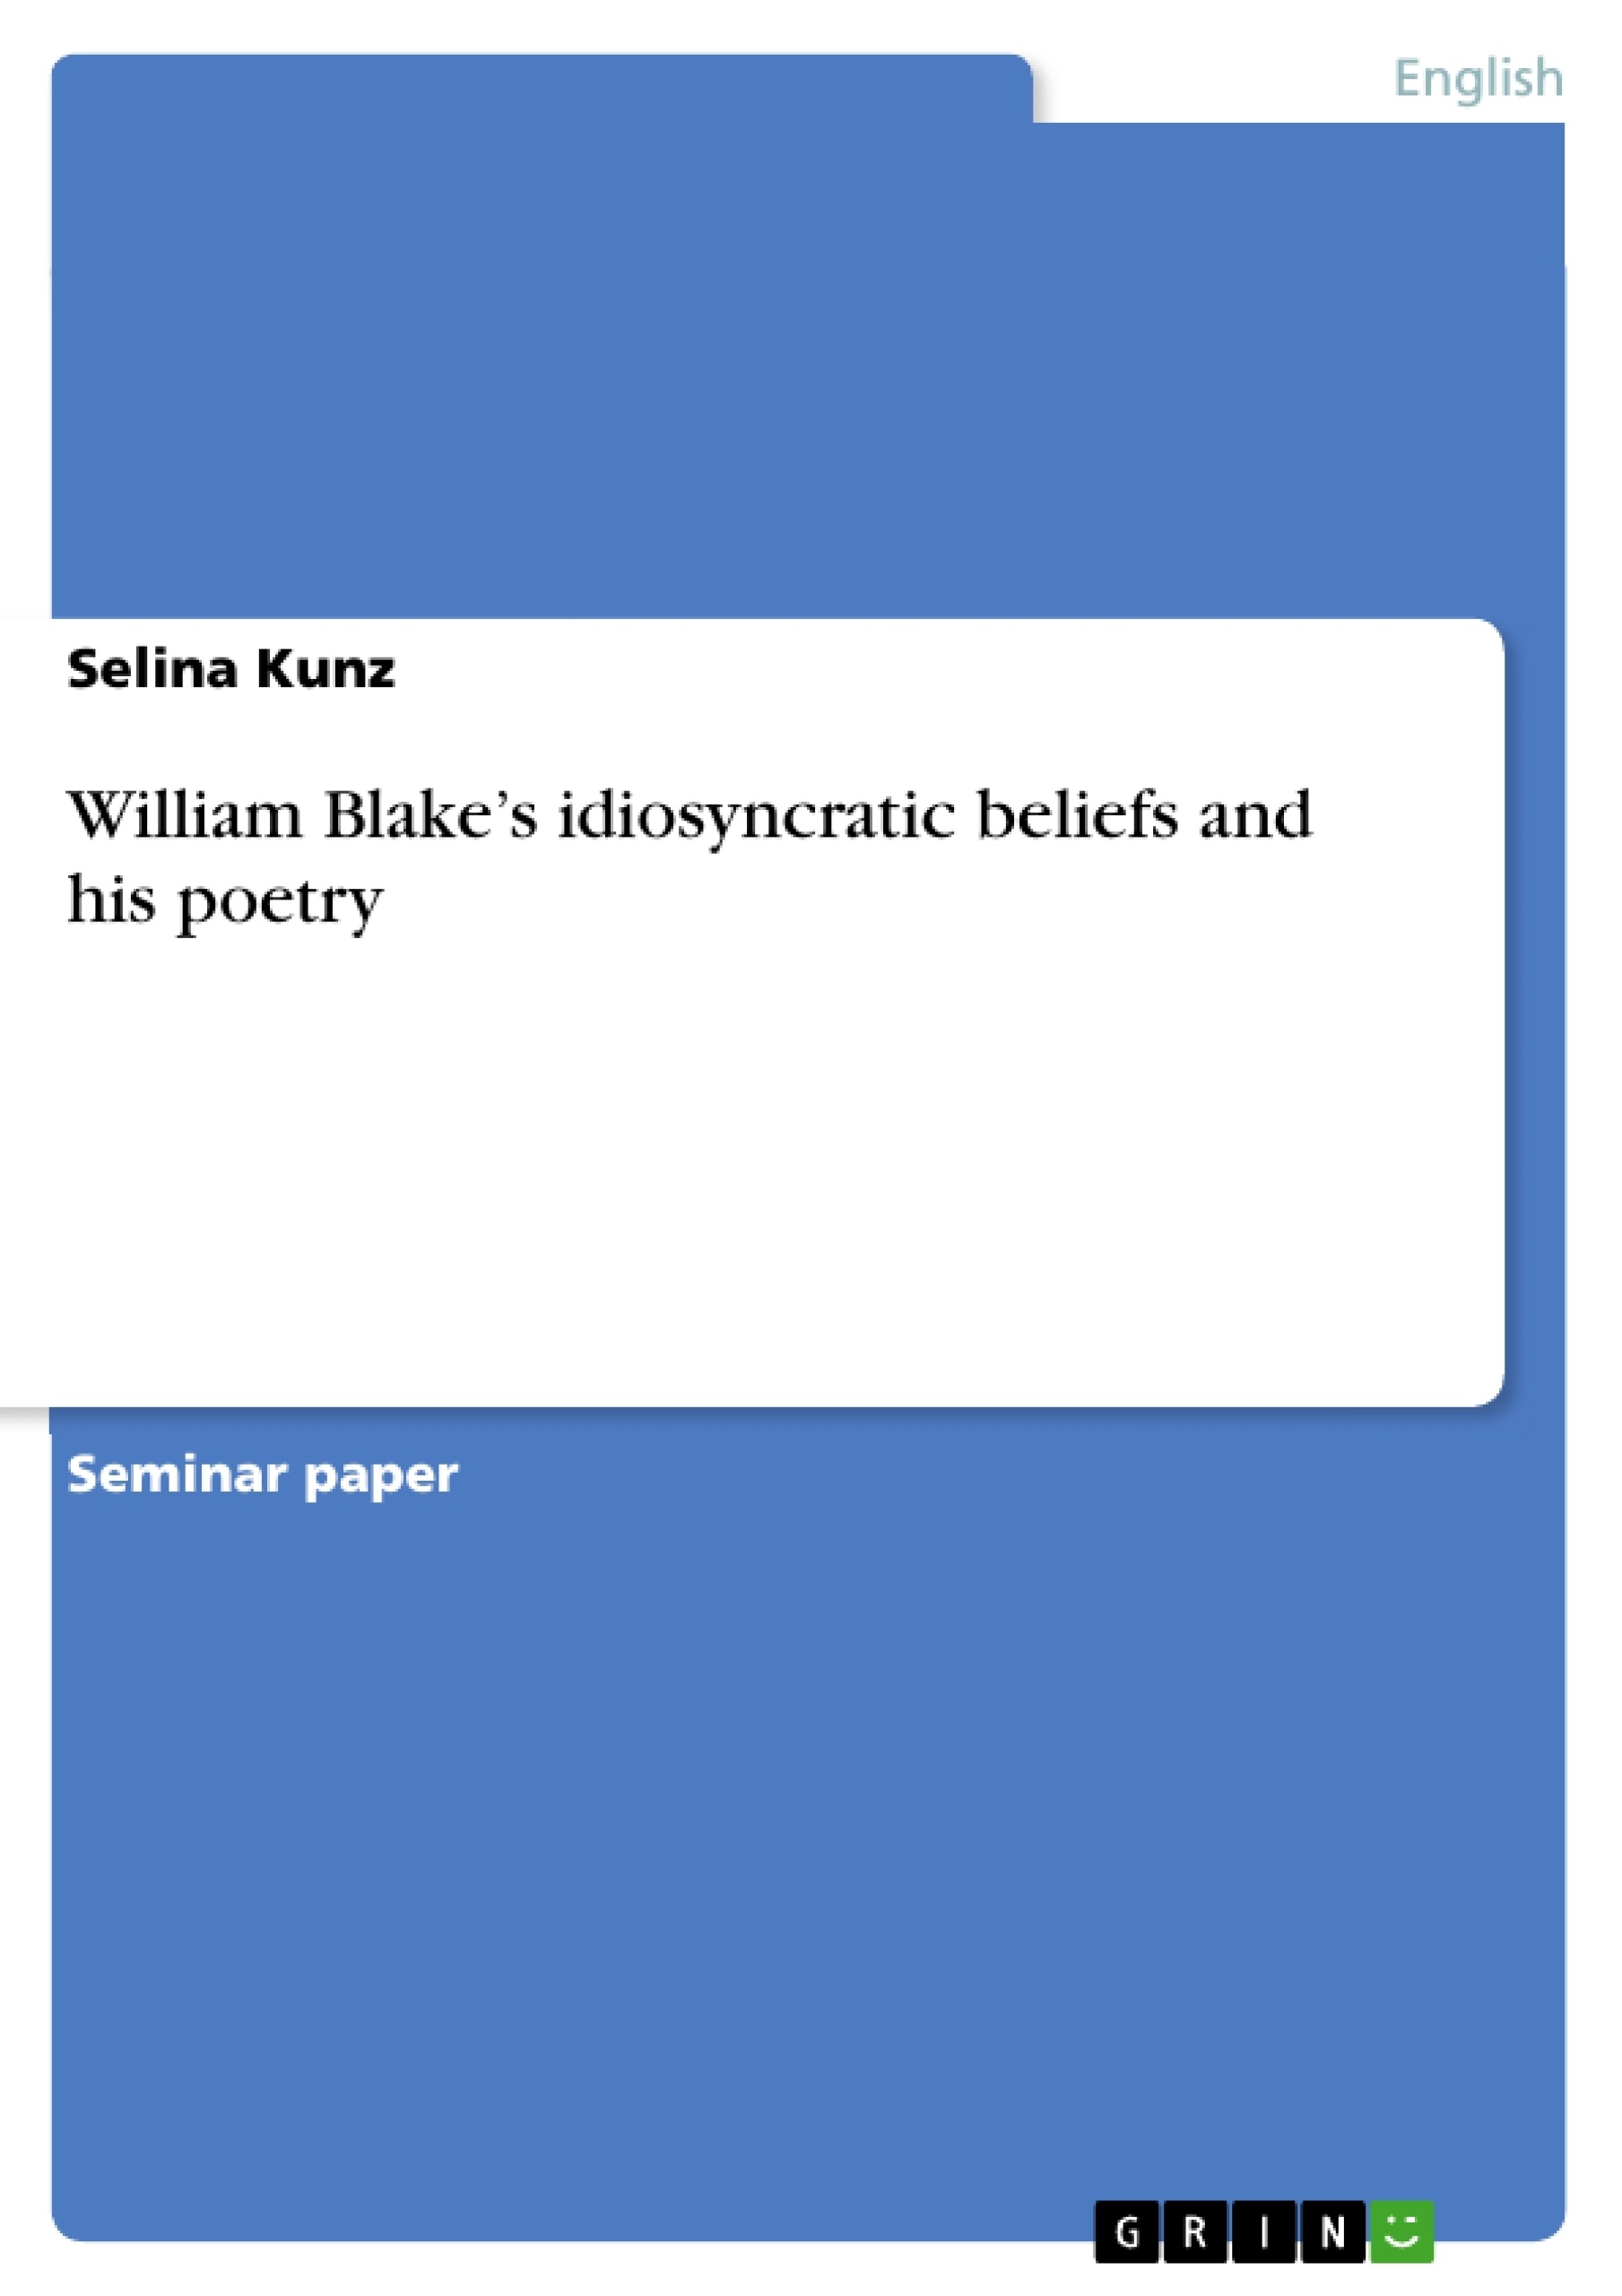 Title: William Blake’s idiosyncratic beliefs and his poetry